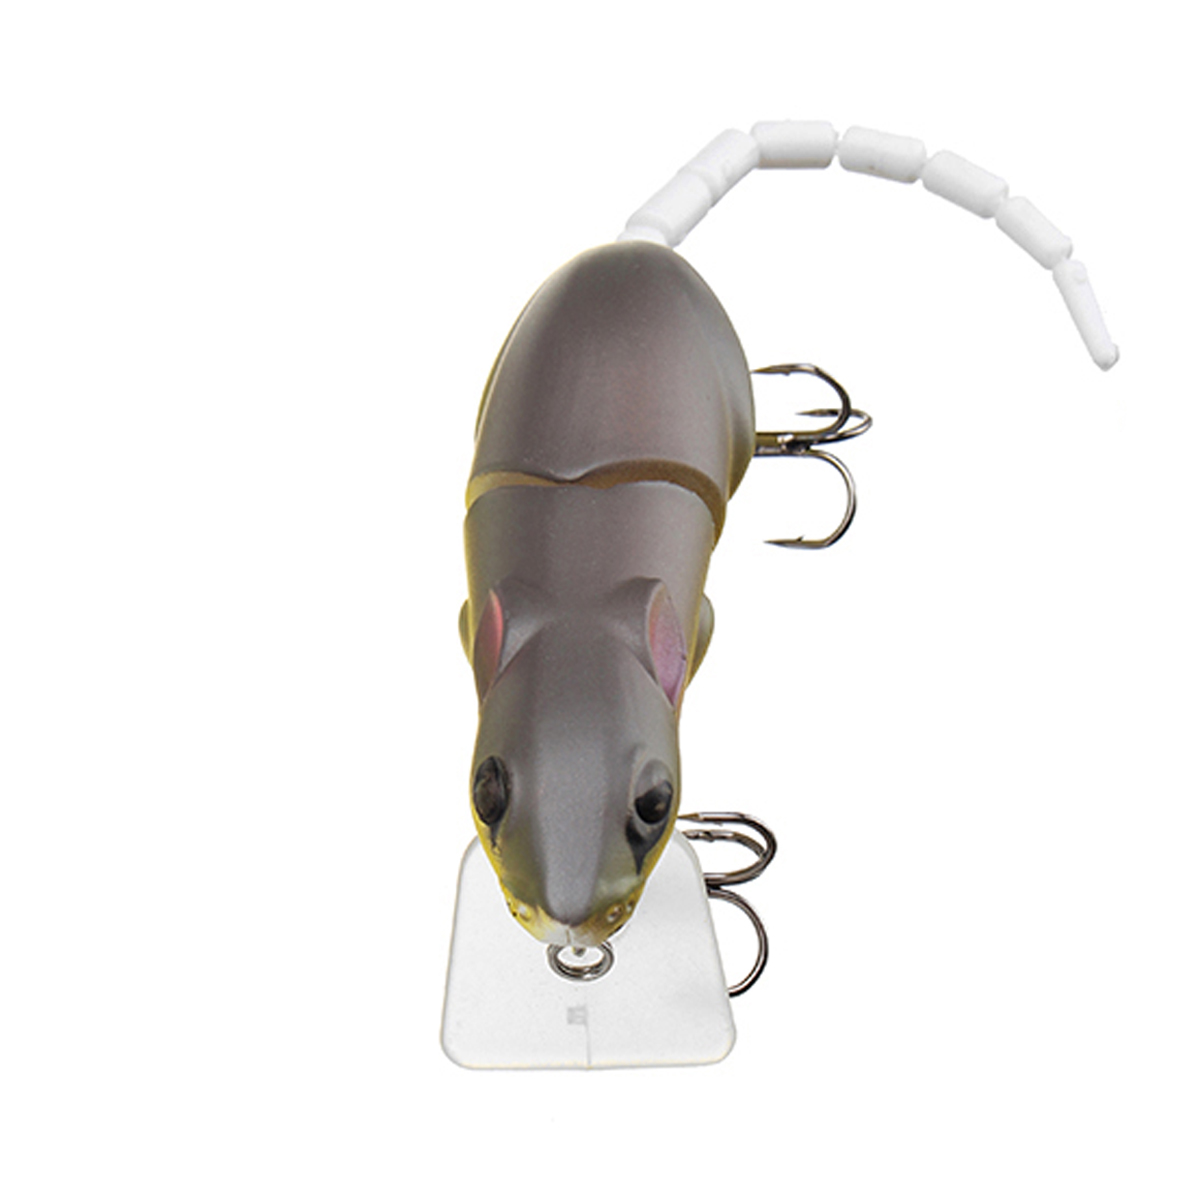 25cm-155g-Jointed-Rat-Fishing-Lure-Mouse-Floating-Crankbait-Sea-Topwater-3D-Eyes-Artificial-Baits-1354966-7